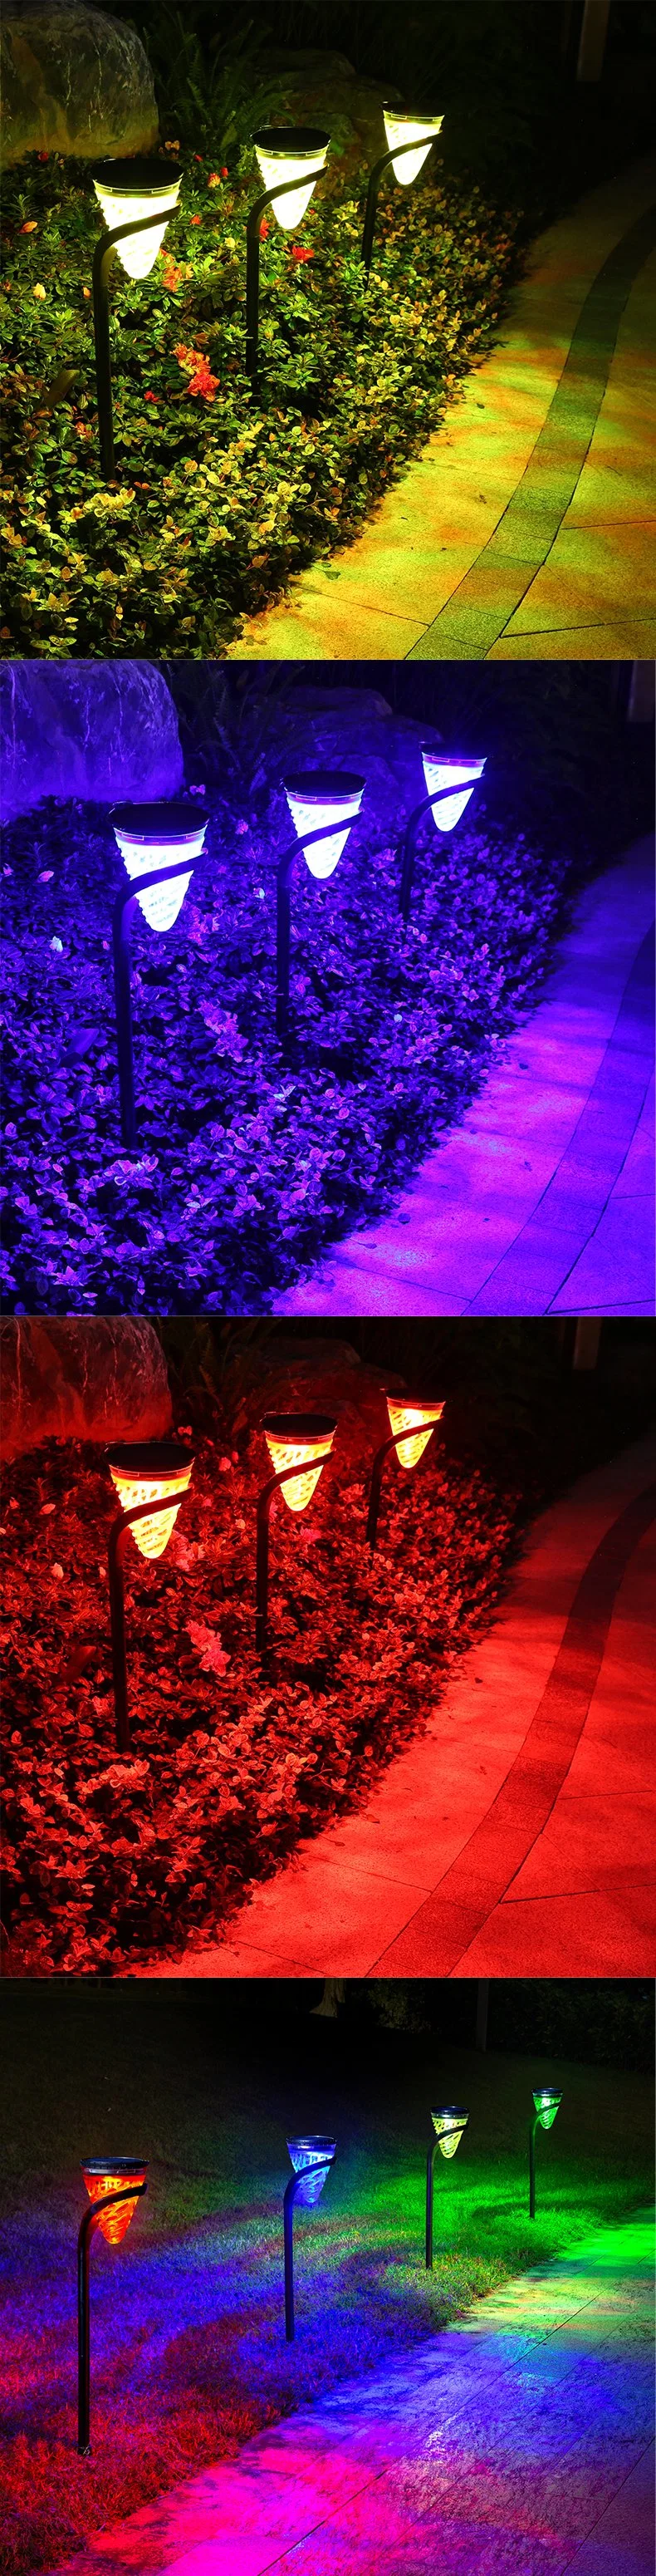 Solar Fence Lights Outdoor, 2 Pack Waterproof Solar Deck Lights Stainless Steel Step Stairs Patio Post Wall Garden Pathway Walkway LED Lamp Light